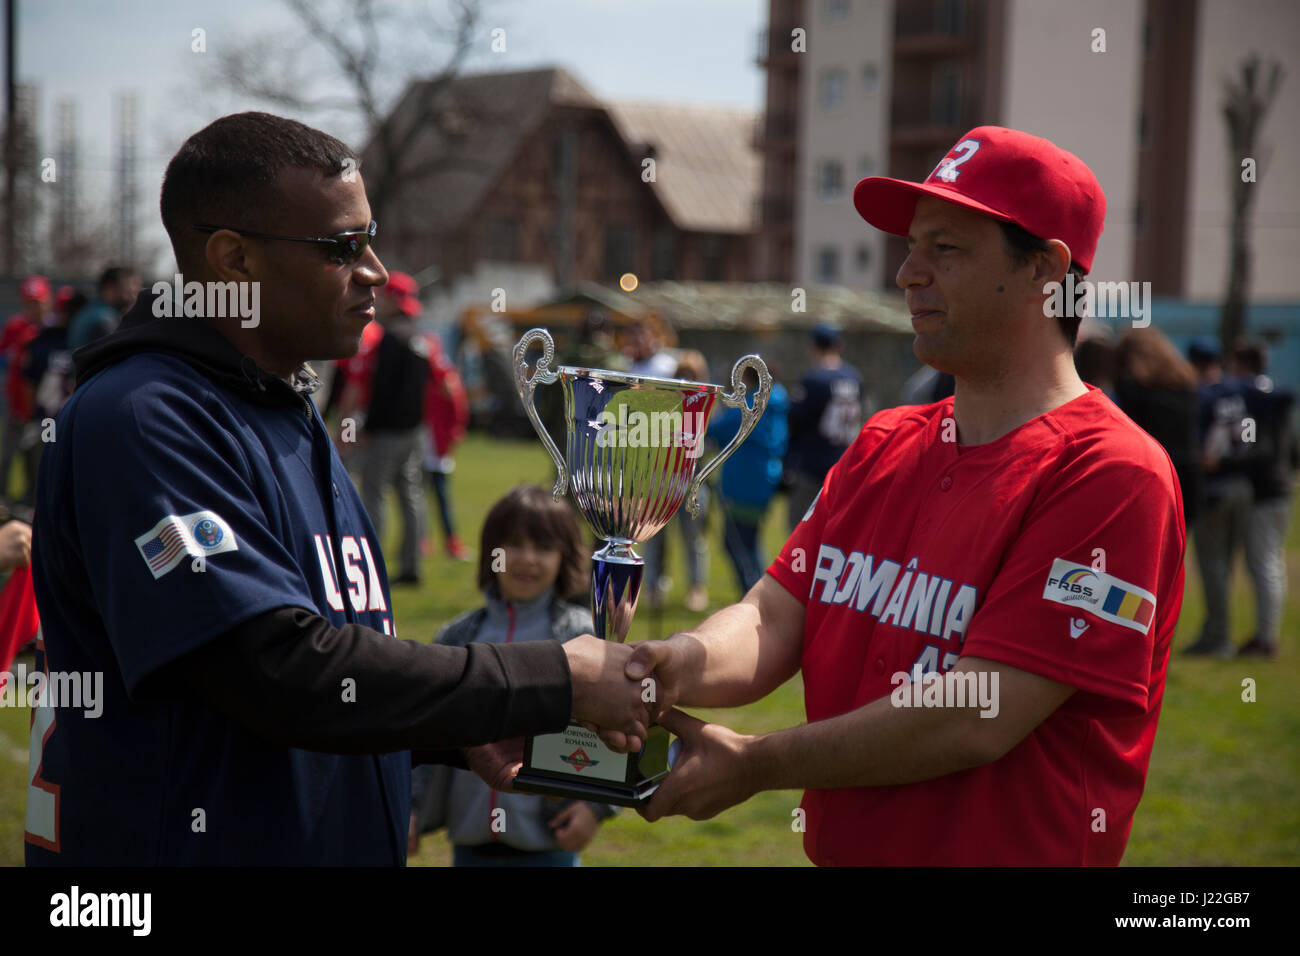 A U.S. Marine with the Black Sea Rotational Force 17.1 congratulates the Romanian coach on winning the Jackie Robinson Day baseball game between the U.S. Marines and a Romanian team in Constanta, Romania, April 15, 2017. The Marine and Romanian players all wore the number 42 jersey in honor of the 70th anniversary of Robinson becoming the first African American player in the Major League Baseball history. (U.S. Marine Corps photo by Cpl. Emily Dorumsgaard) Stock Photo